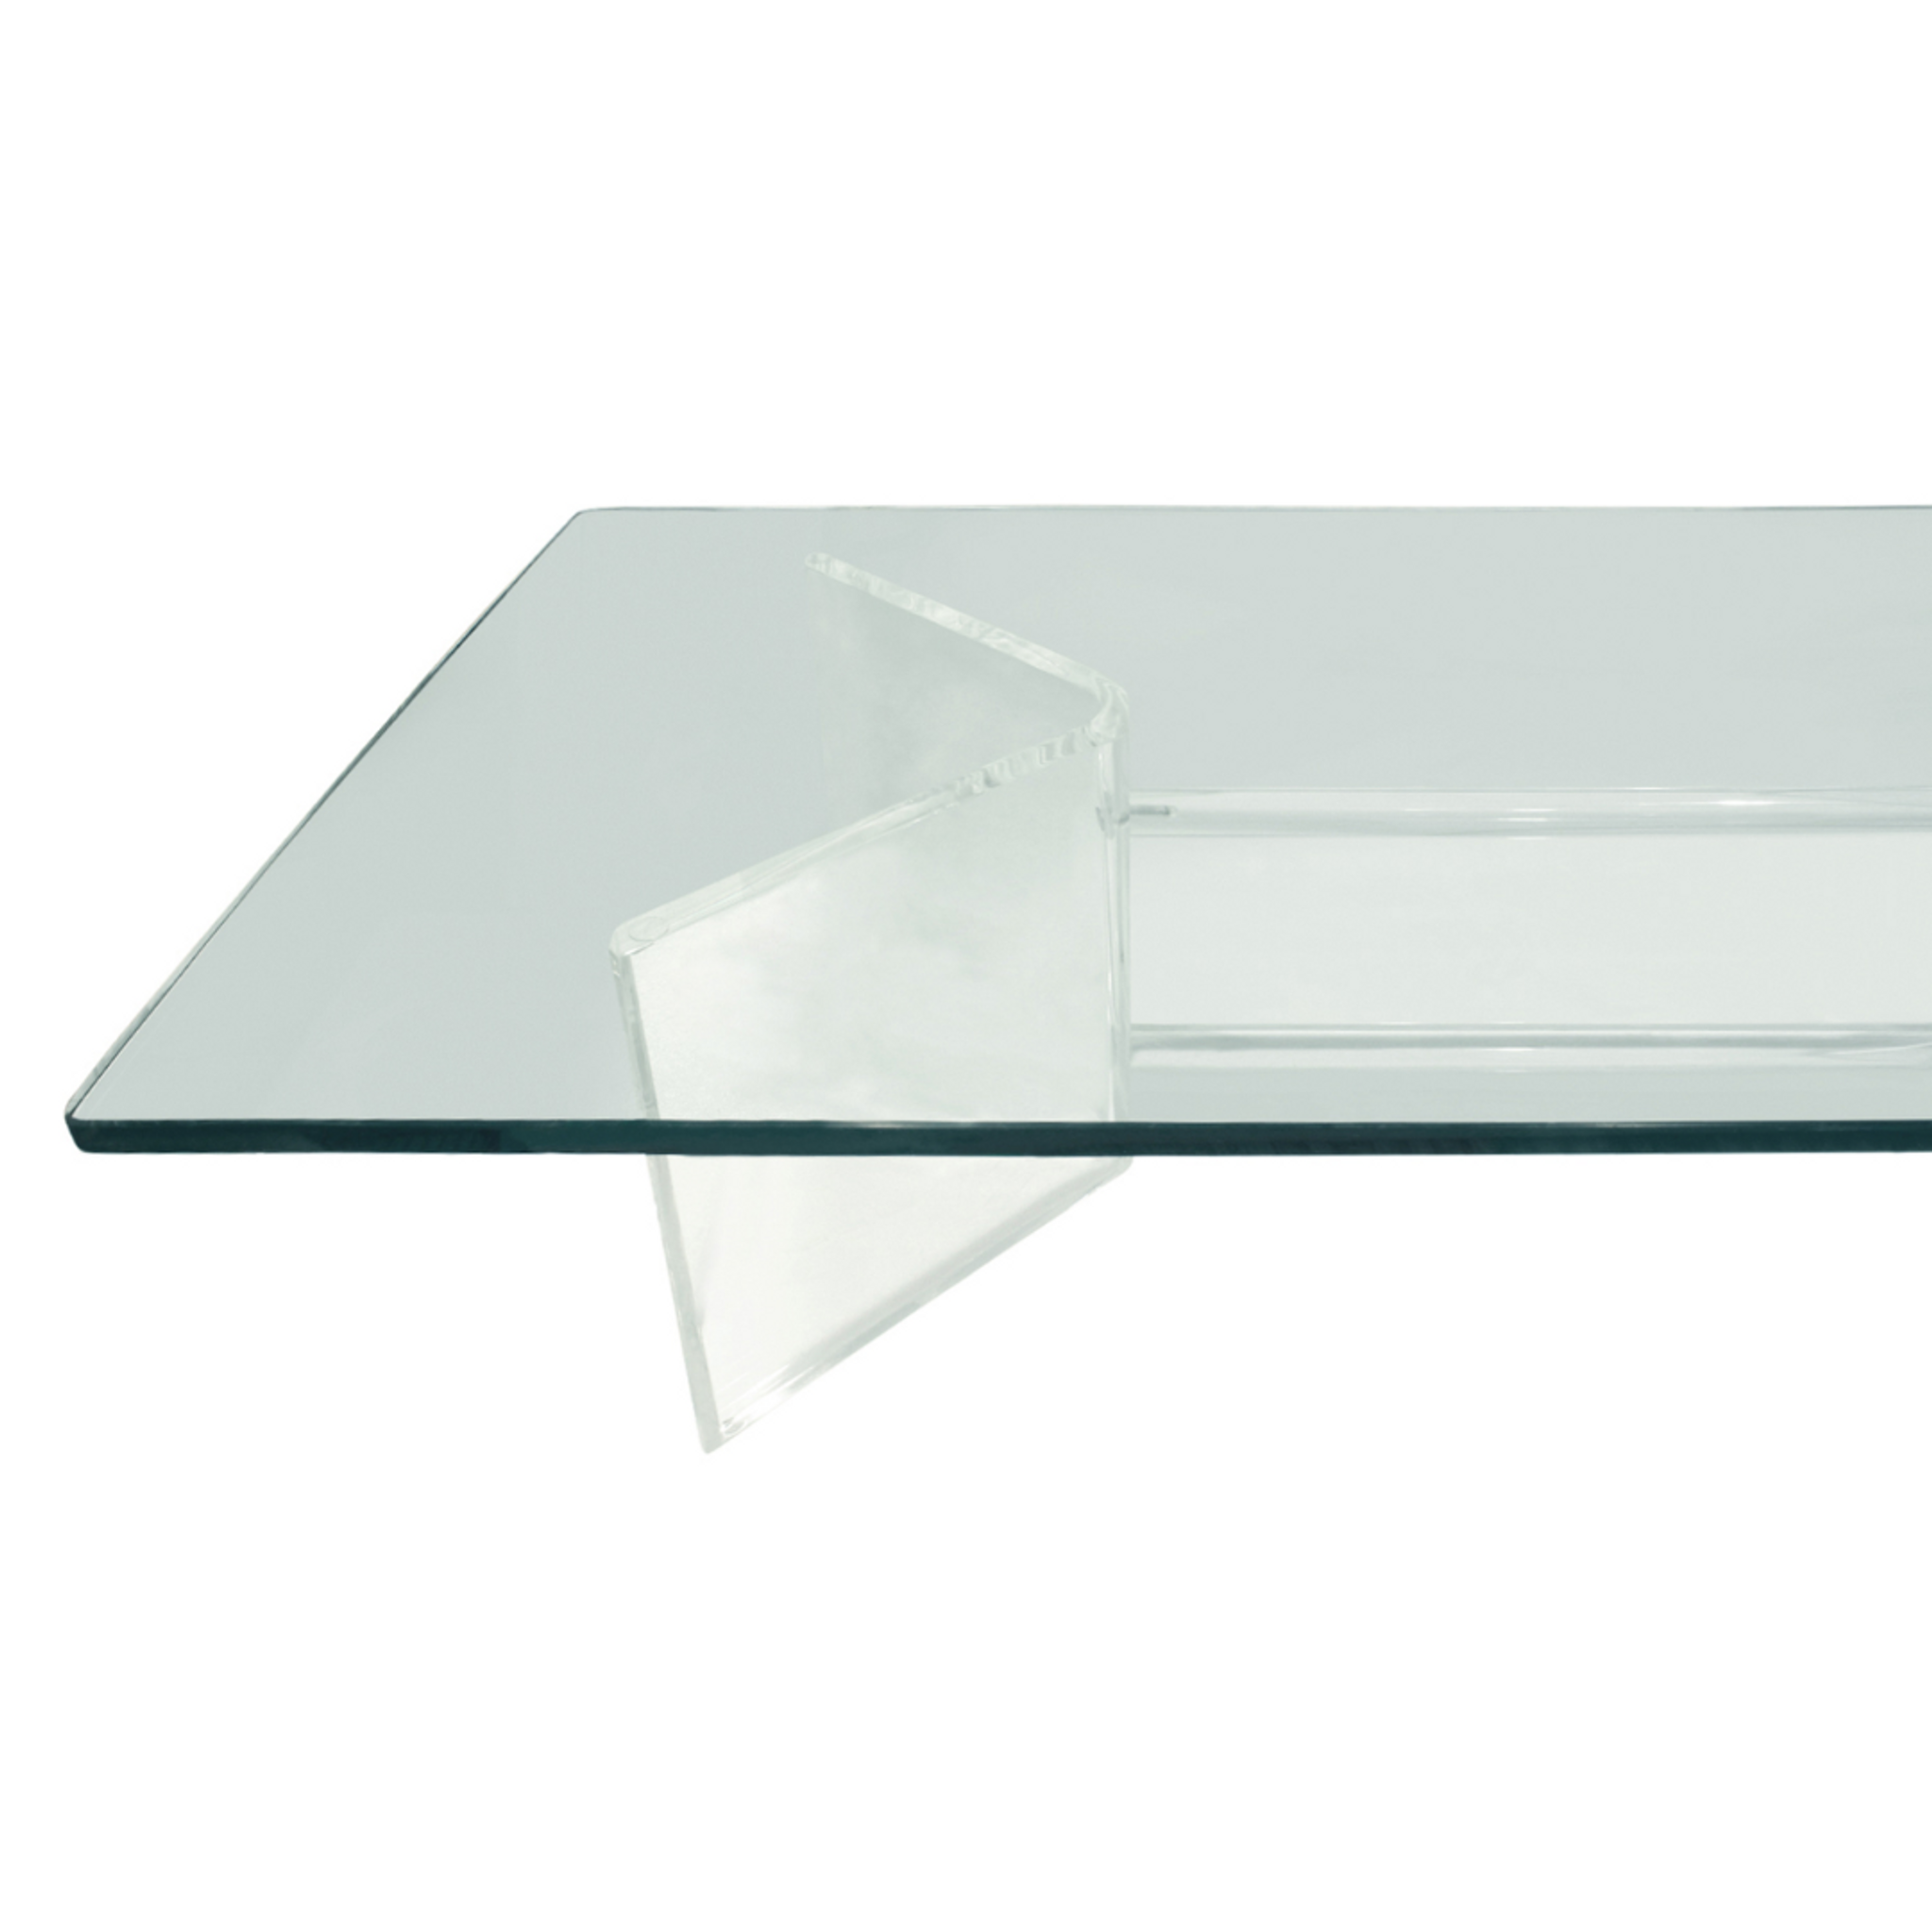 Rectangular Lucite Coffee Table with Boomerang Trestle Base